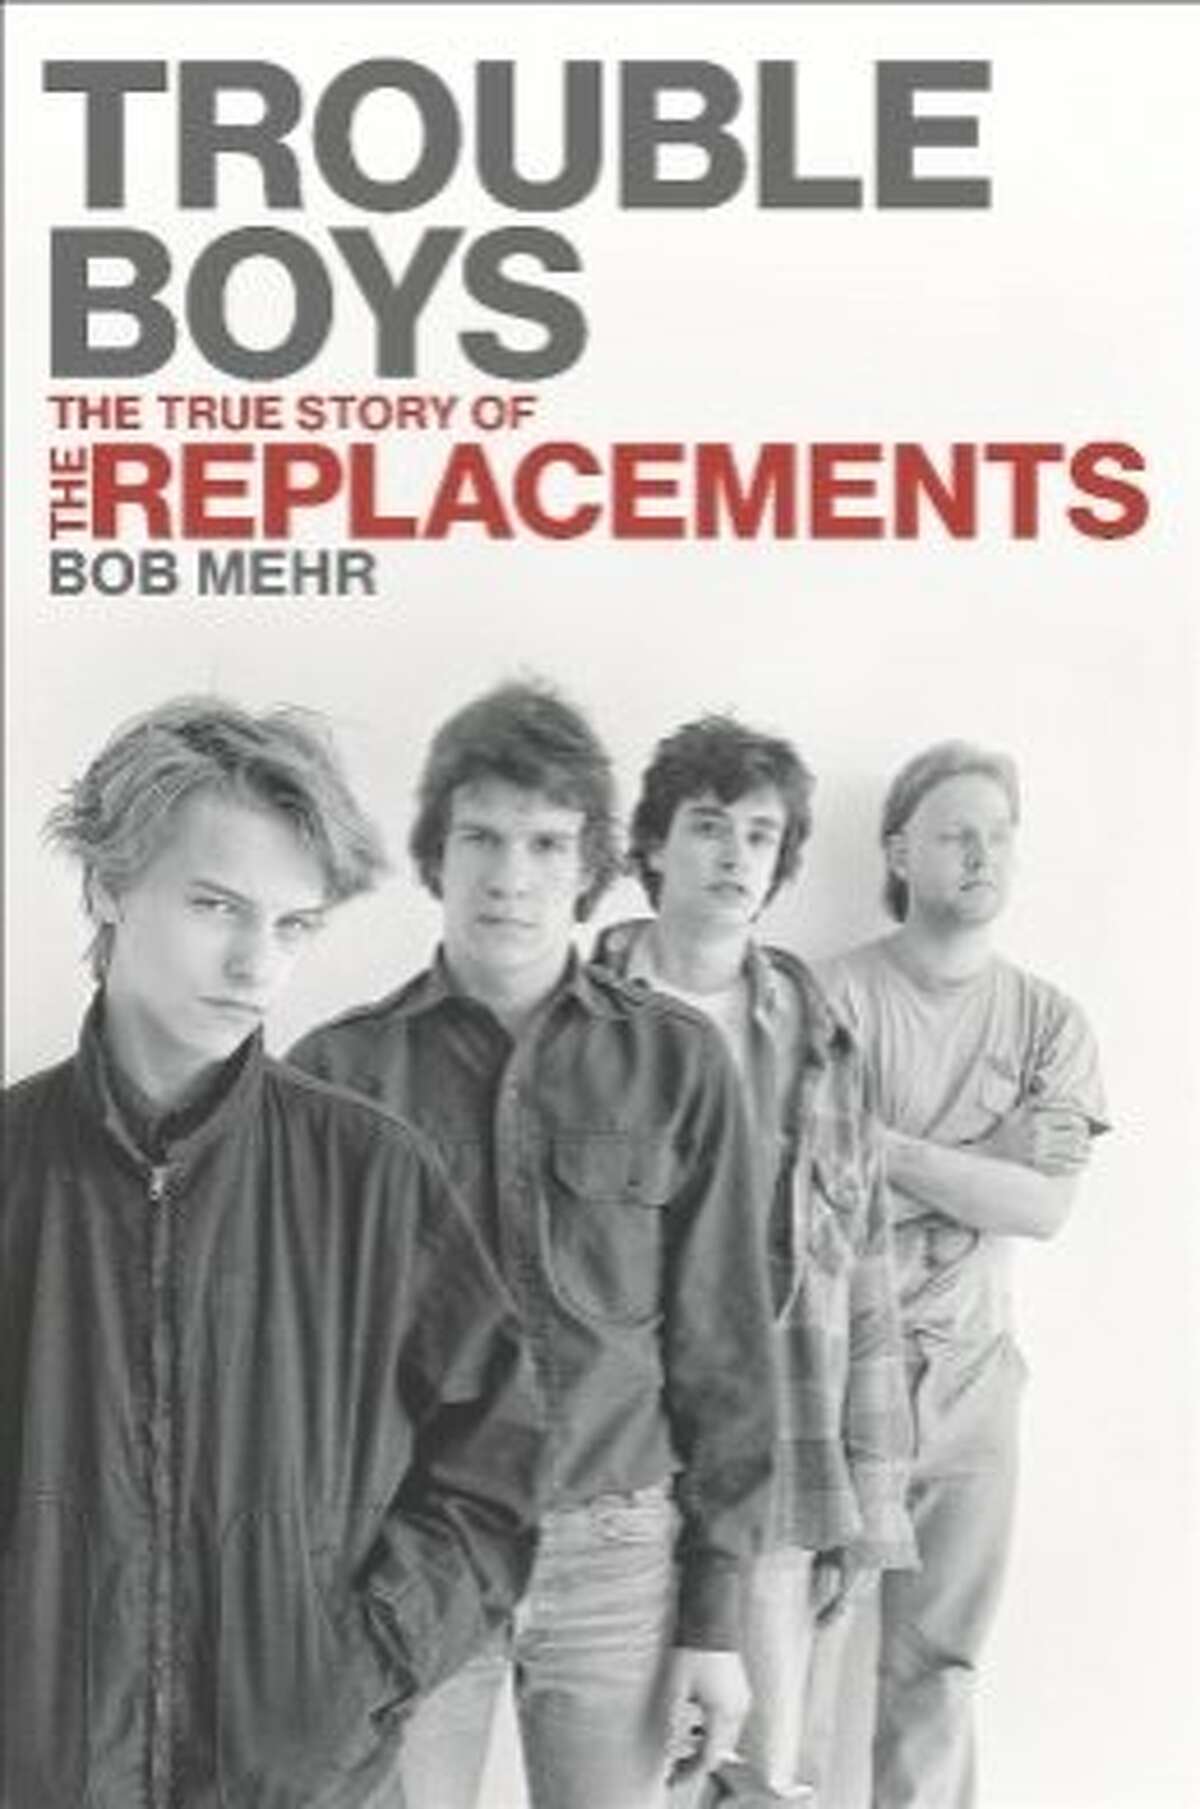 Book cover: "Trouble Boys: The True Story of the Replacements"